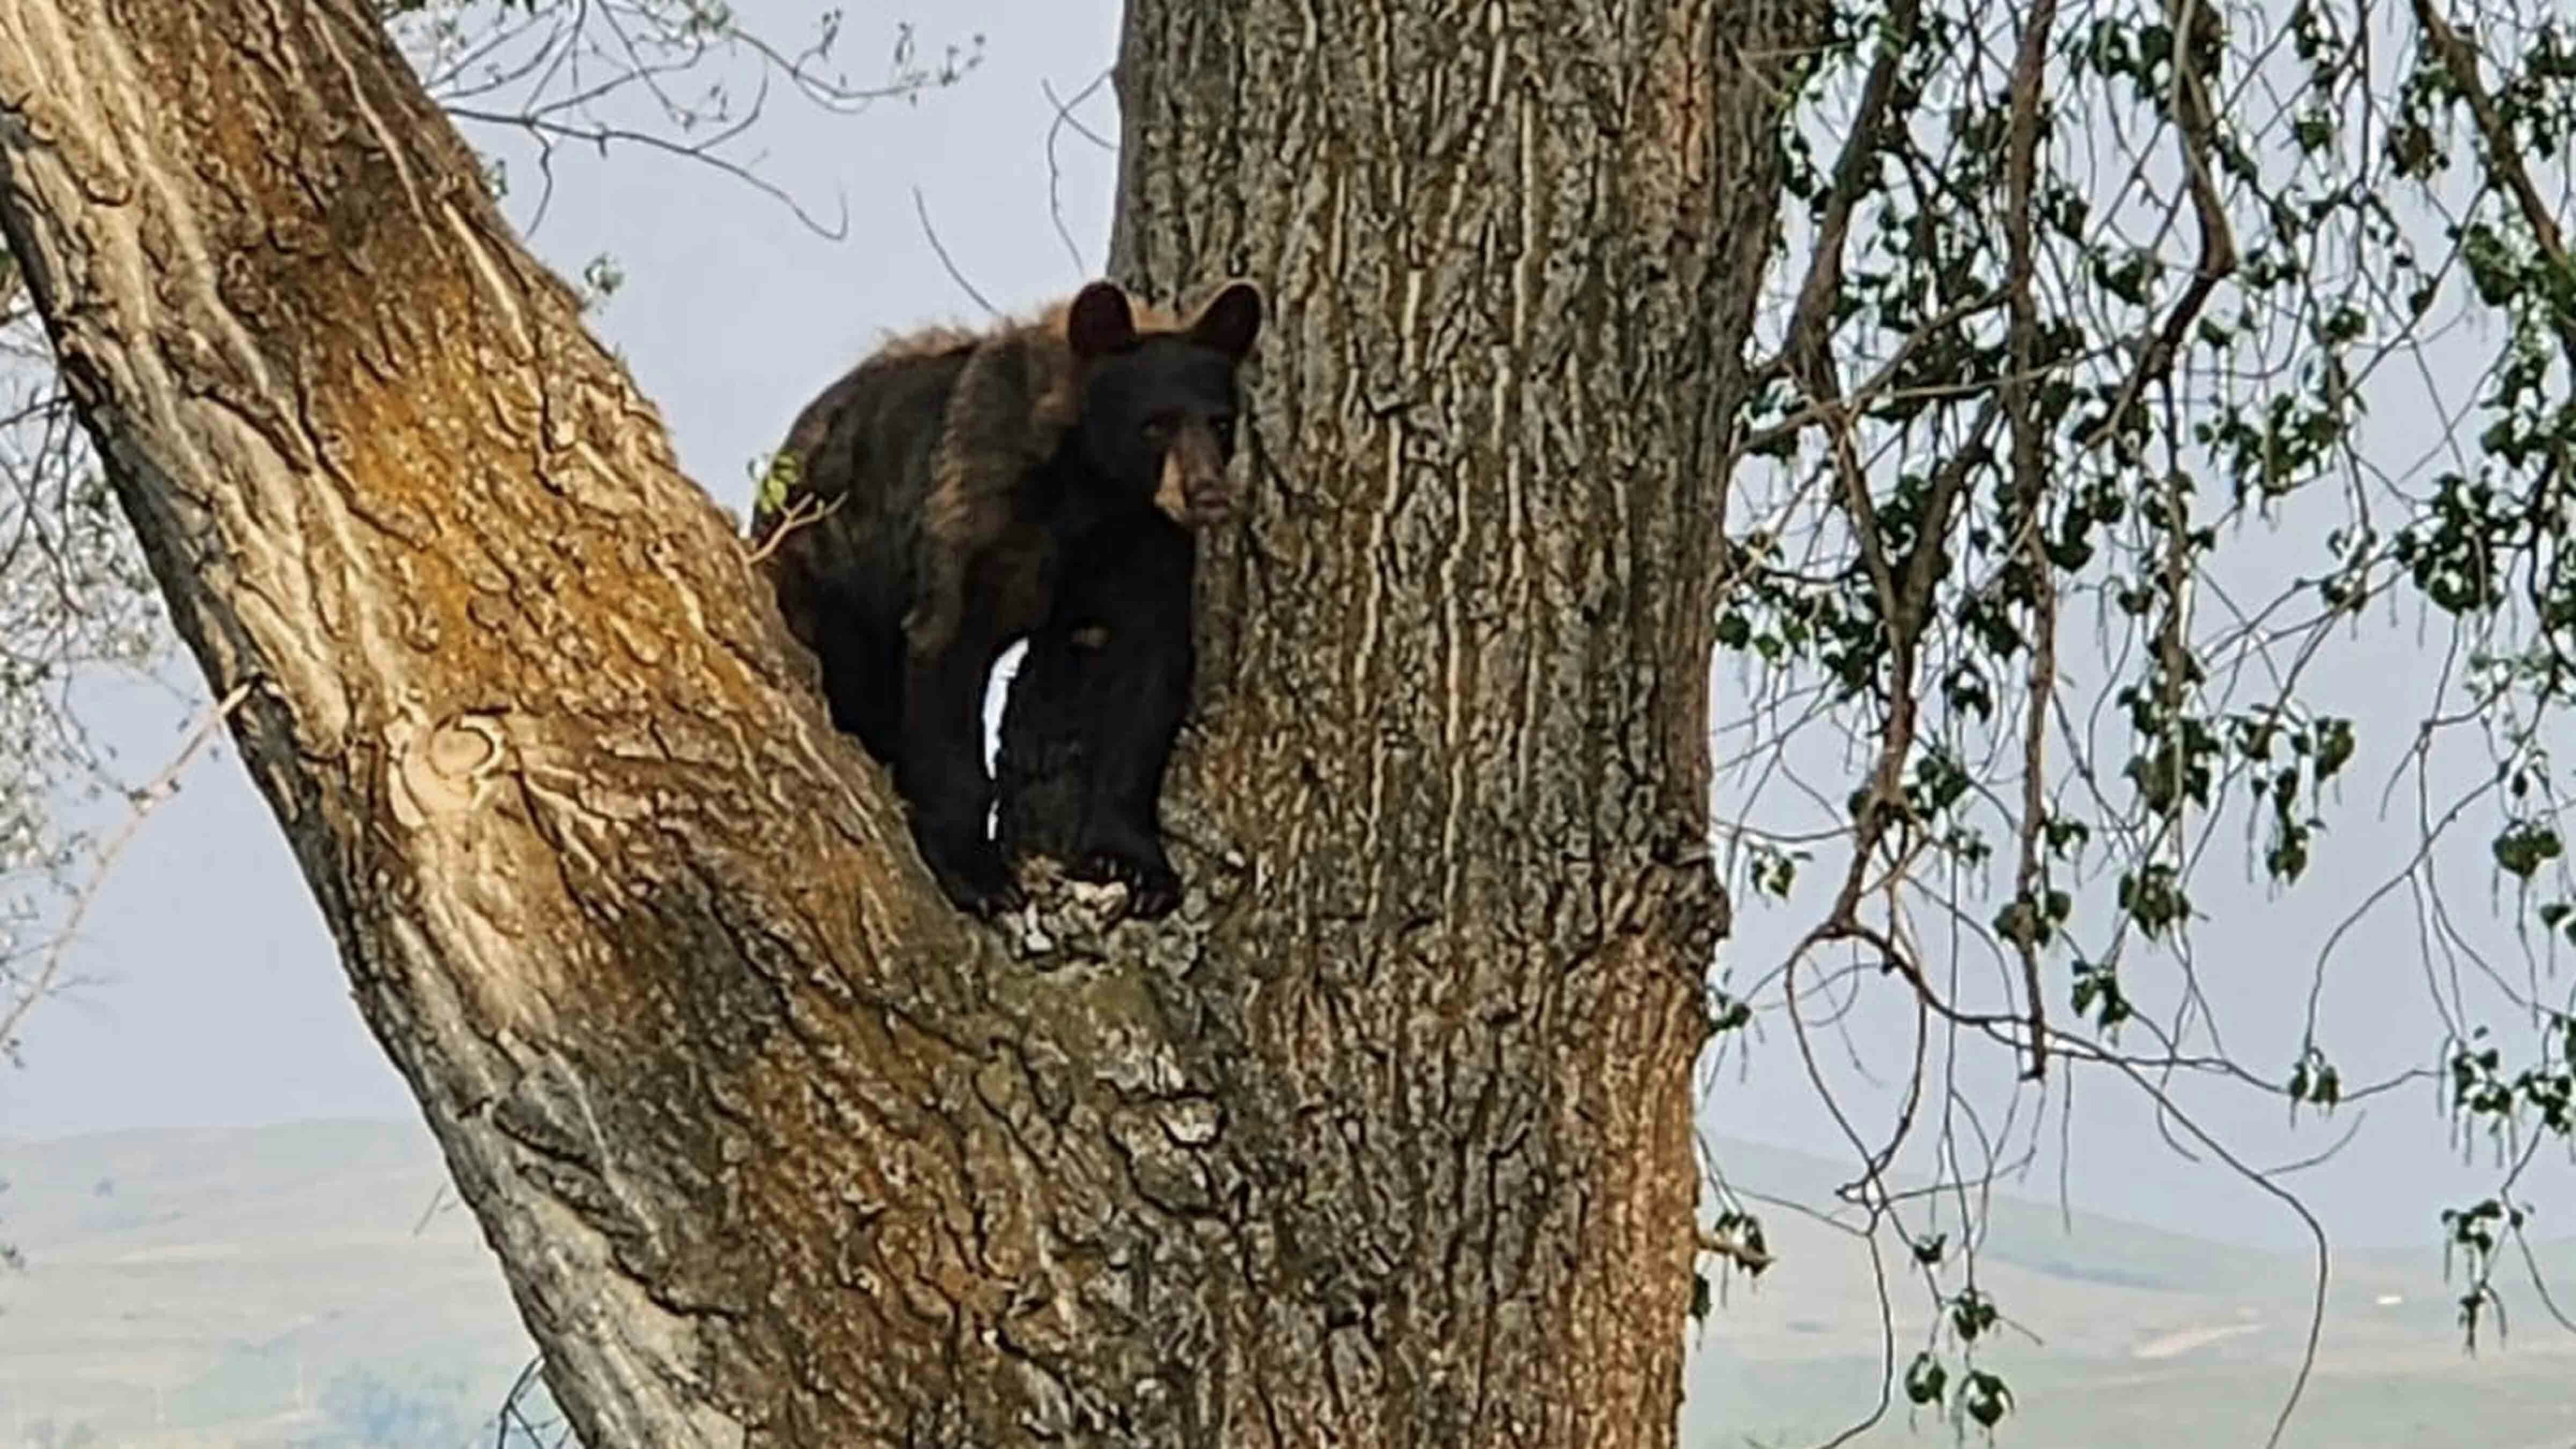 A 6-year-old black bear that came into Sheridan on Friday morning looking for food was destroyed by state Game and Fish officials after discovering it had been removed from the city and relocated once before.